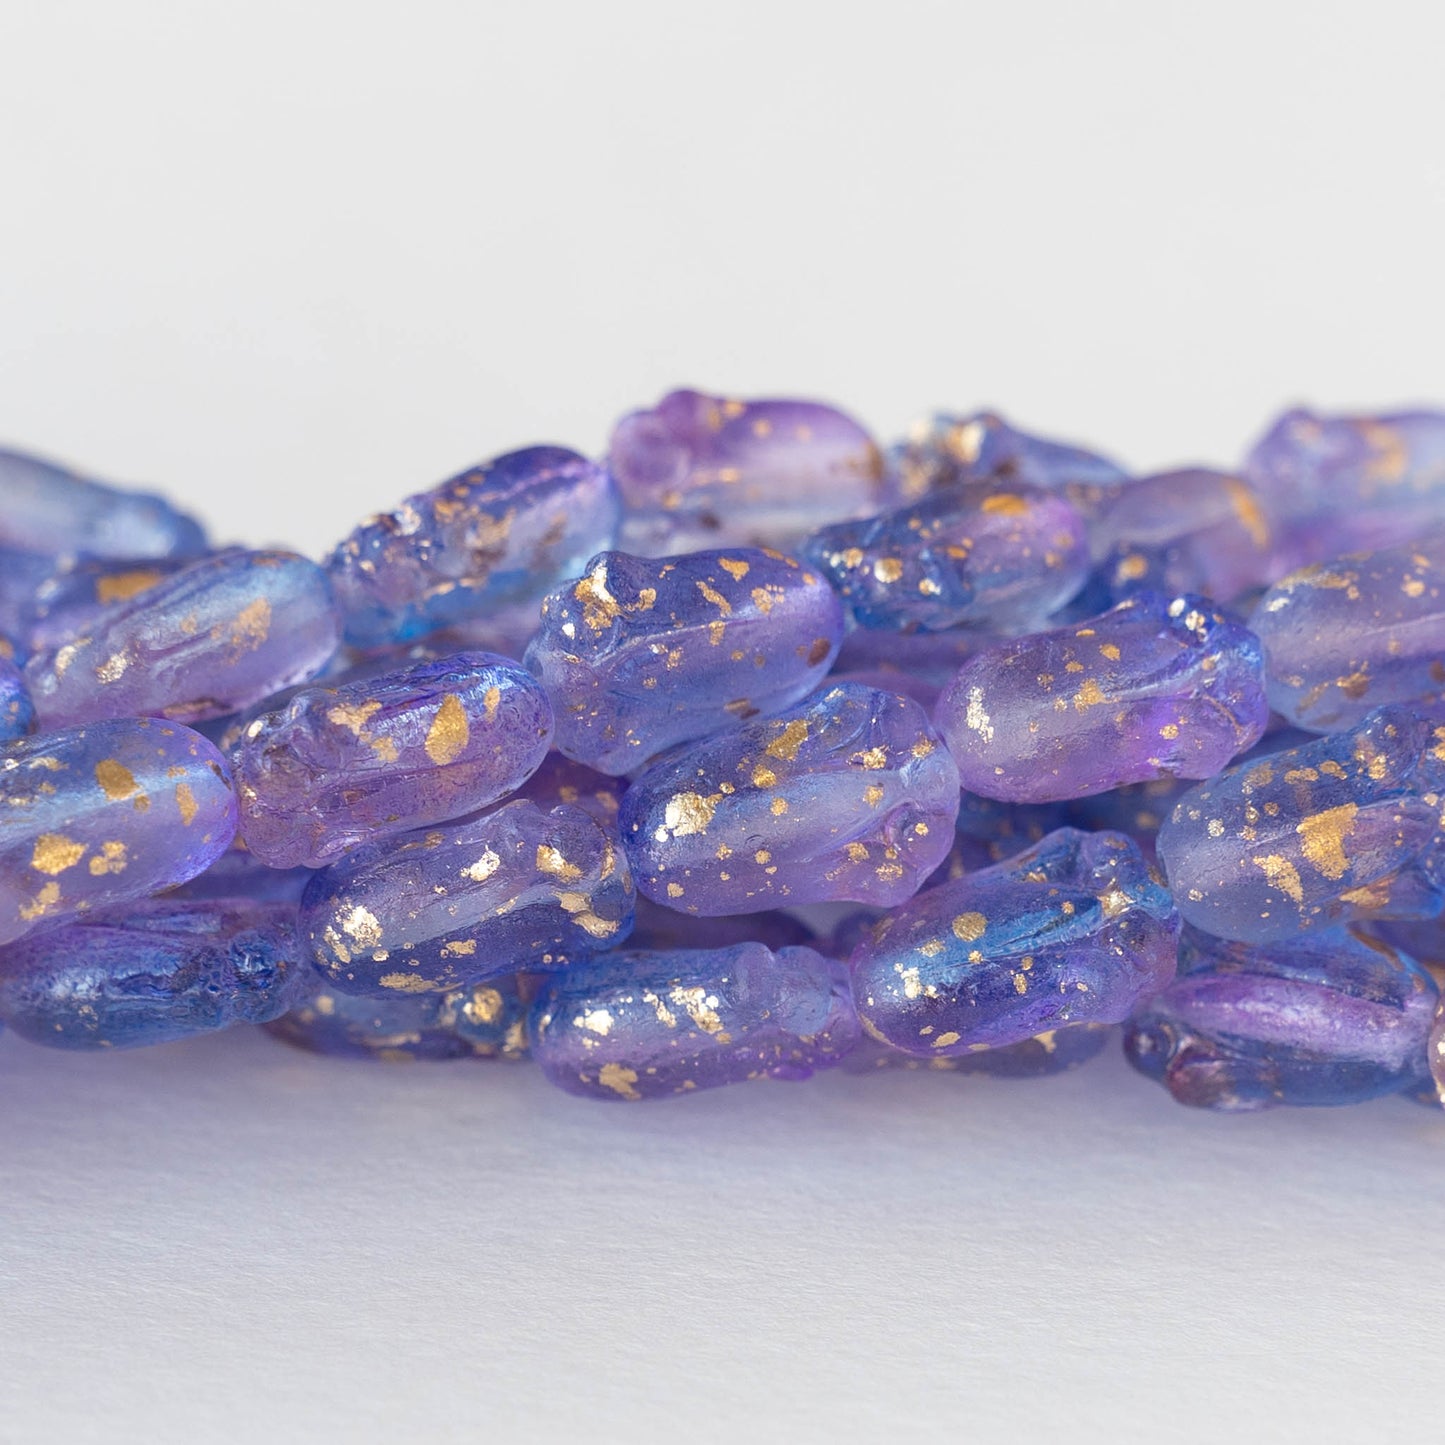 Tulip Flower Beads - Lavender with Gold Dust - 12 beads